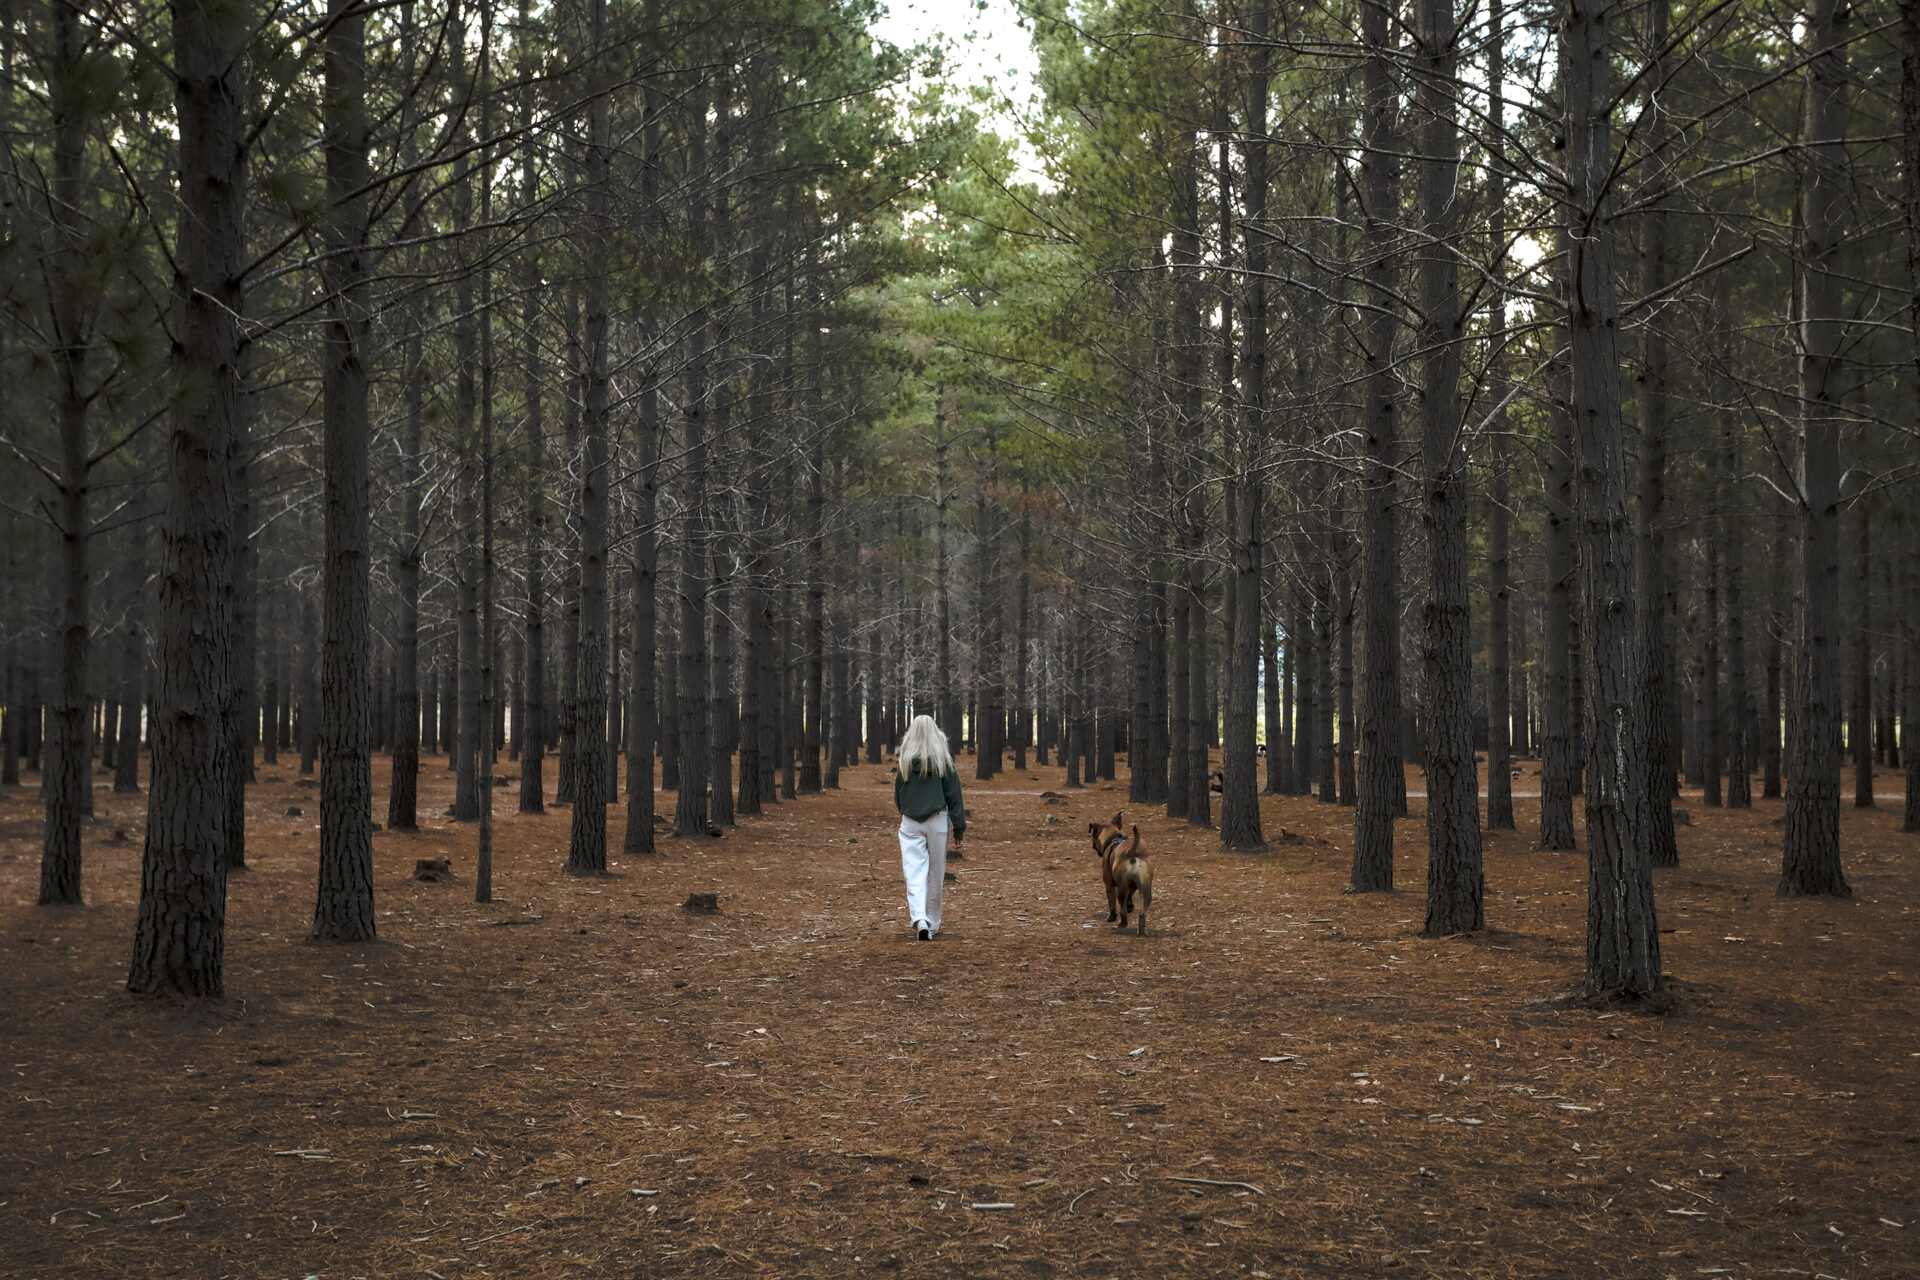 A woman walking off-leash with her dog through a forest